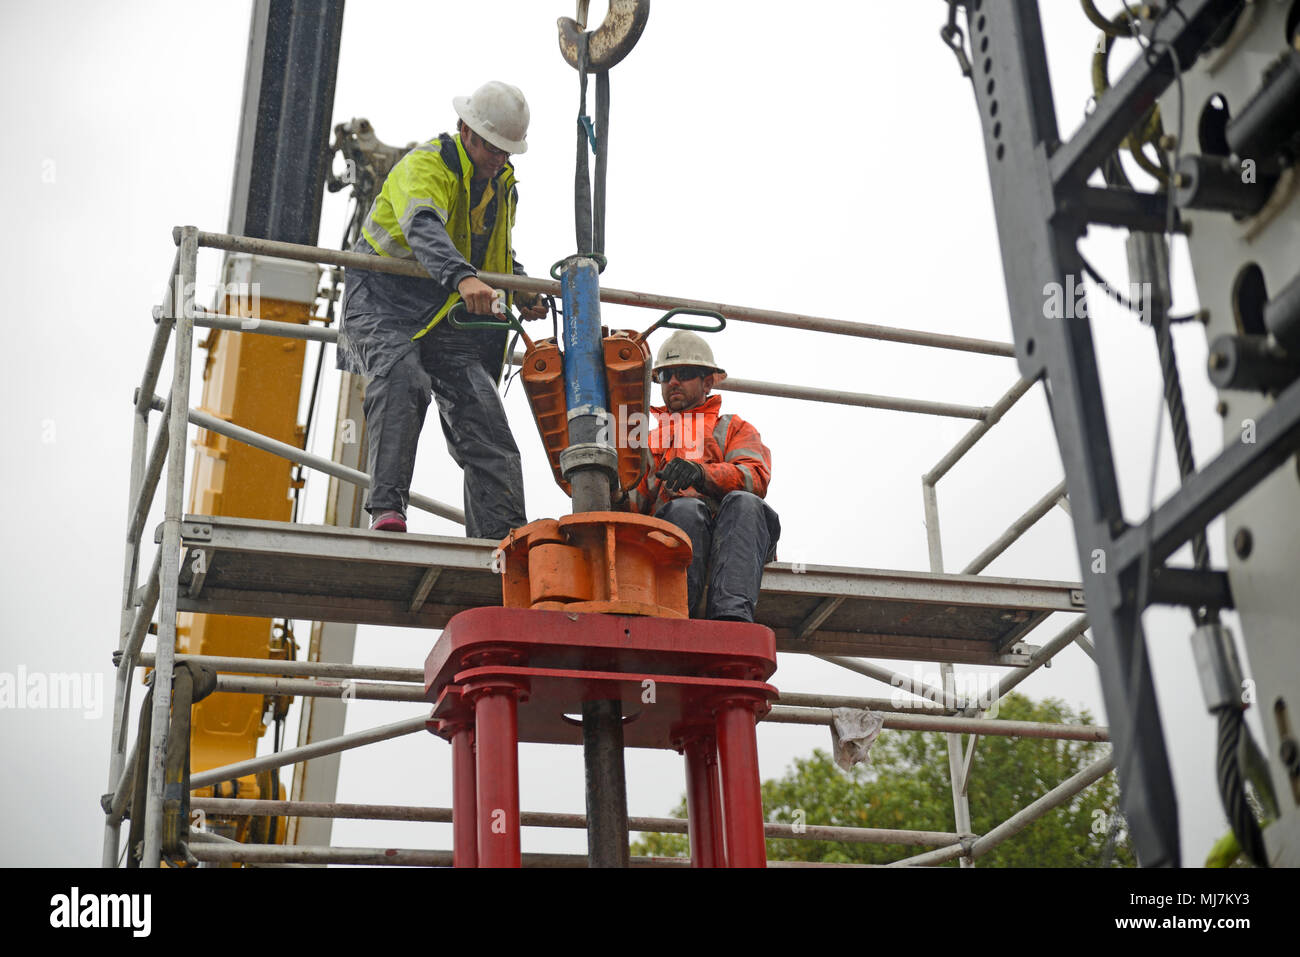 MOANA, NEW ZEALAND, NOVEMBER 4, 2017: Engineers work in the rain setting up lifting equipment to remove the steel casing from an oil well that is bein Stock Photo